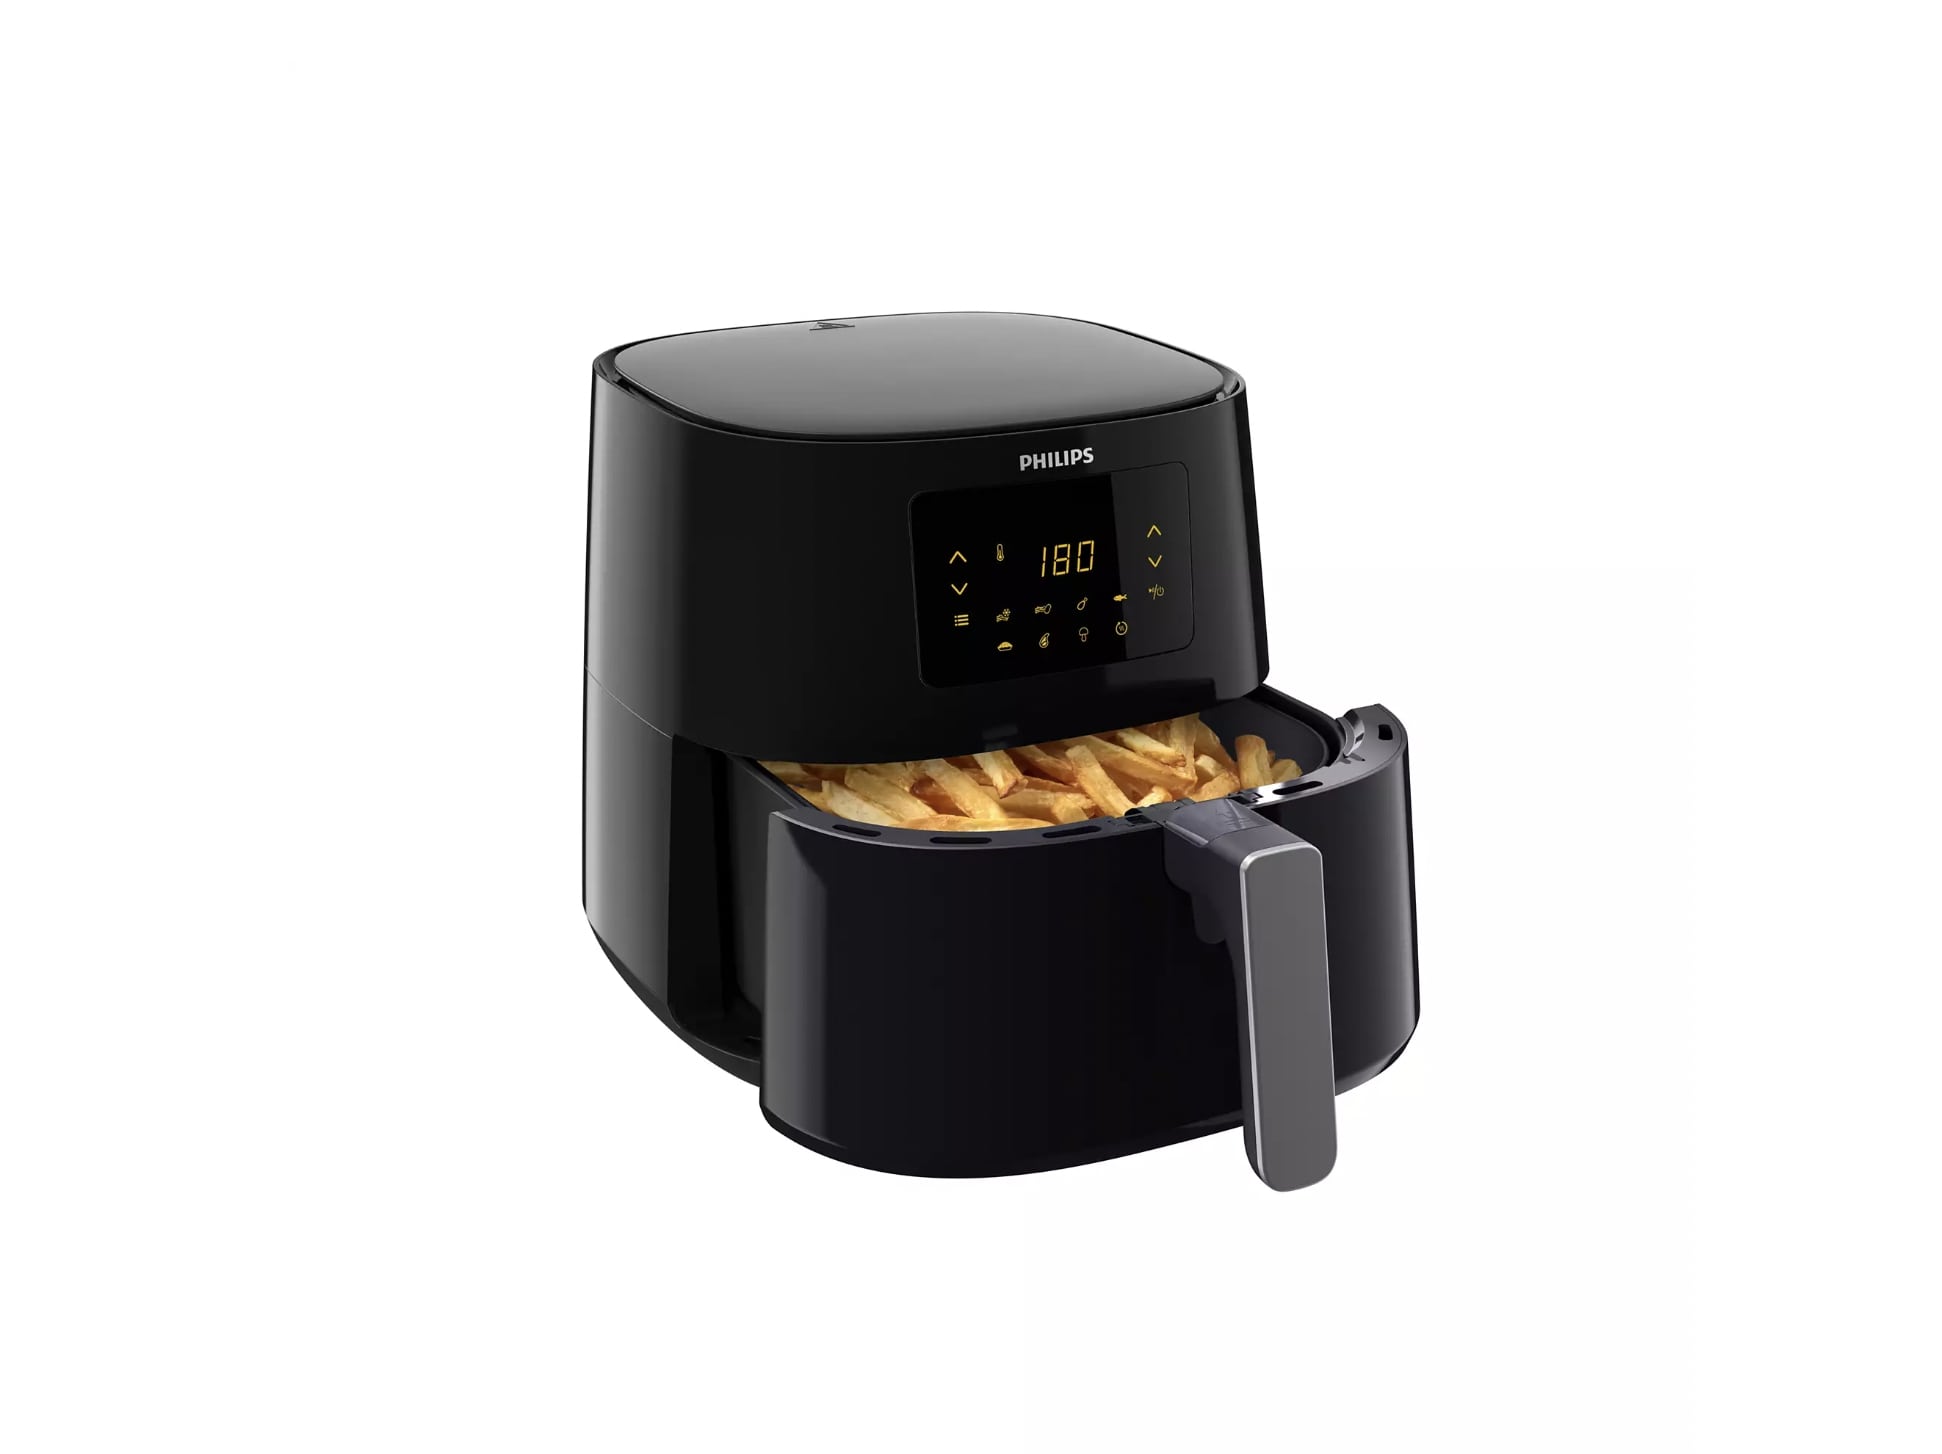 PHILIPS PDHD9270/70 airfryer